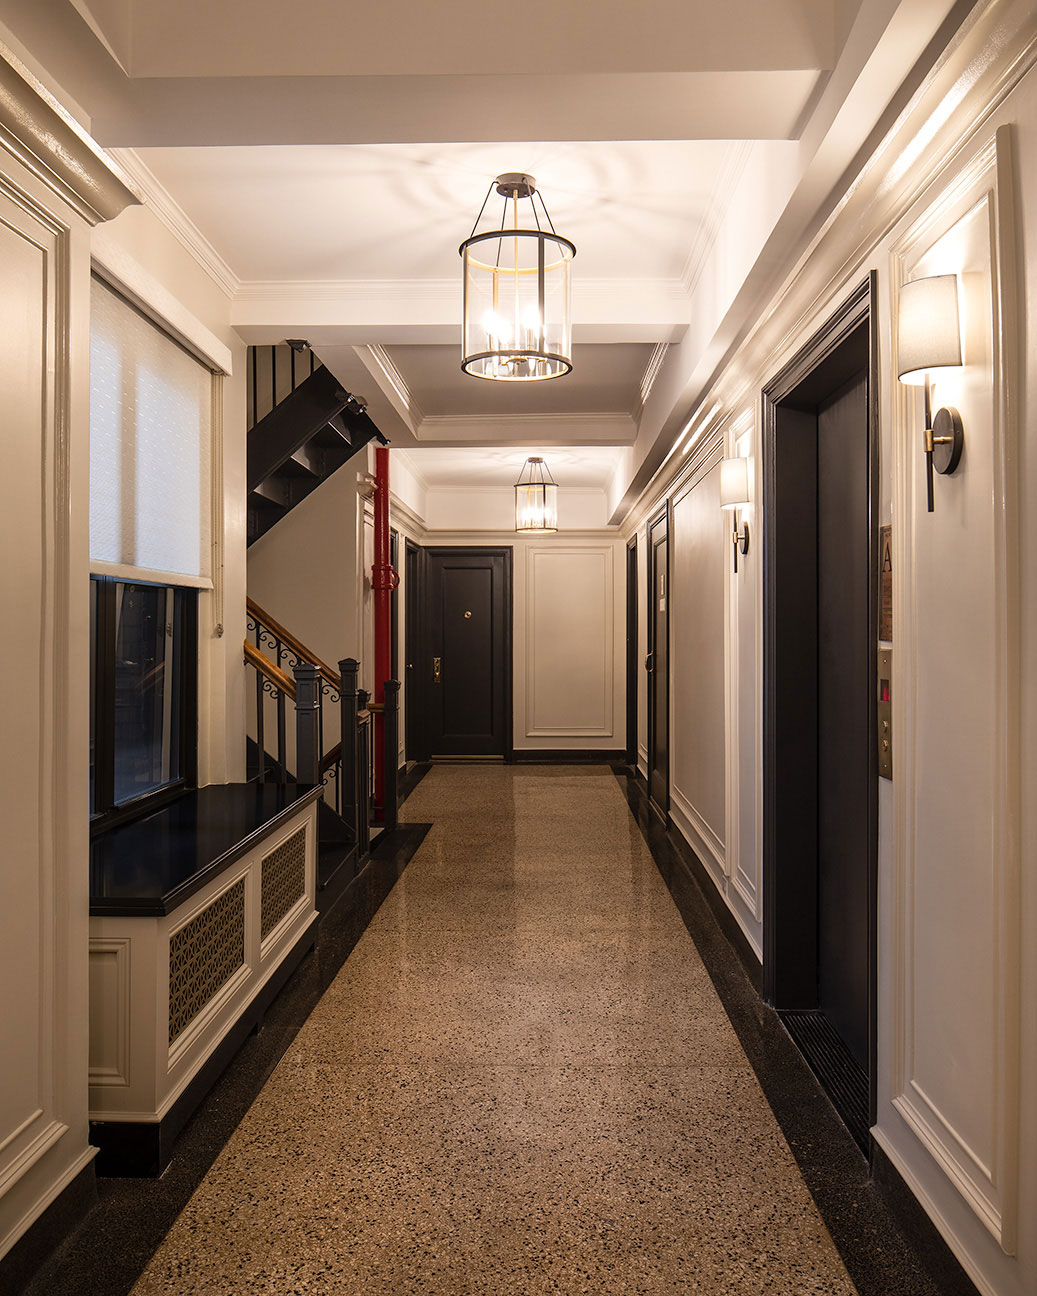 Is a Minimalist Approach Practical For The Hallway Design? | TheAmberPost